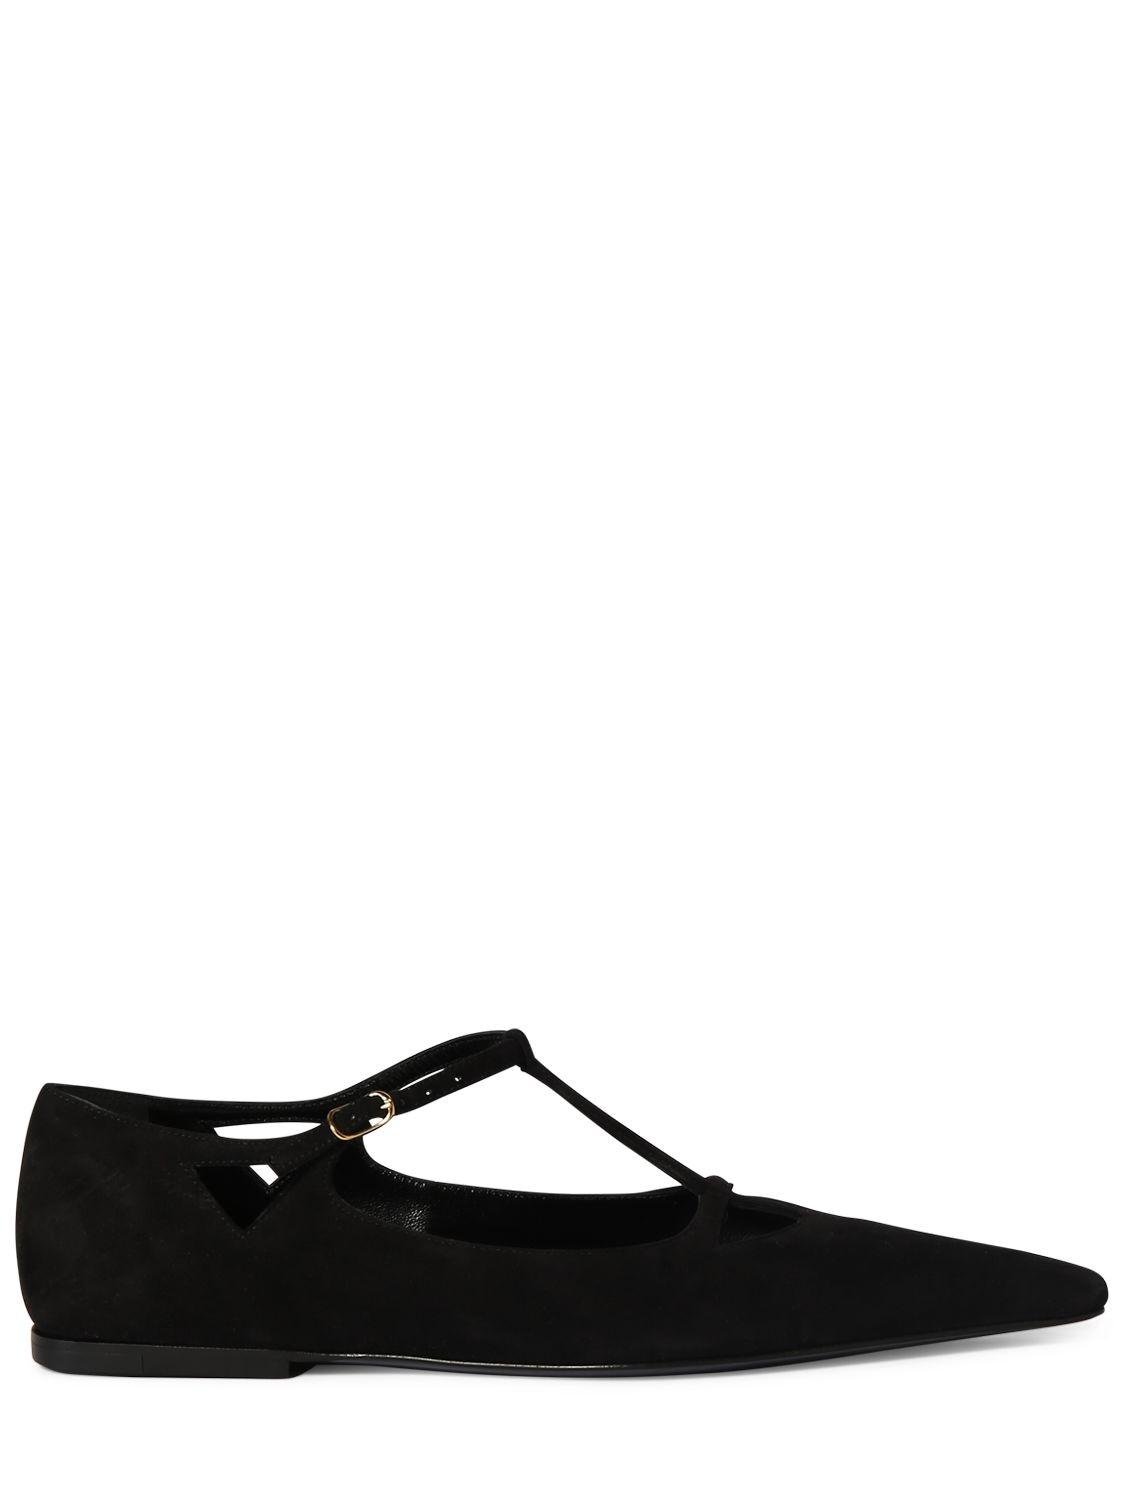 Cyd Suede Ballerina Flats by THE ROW